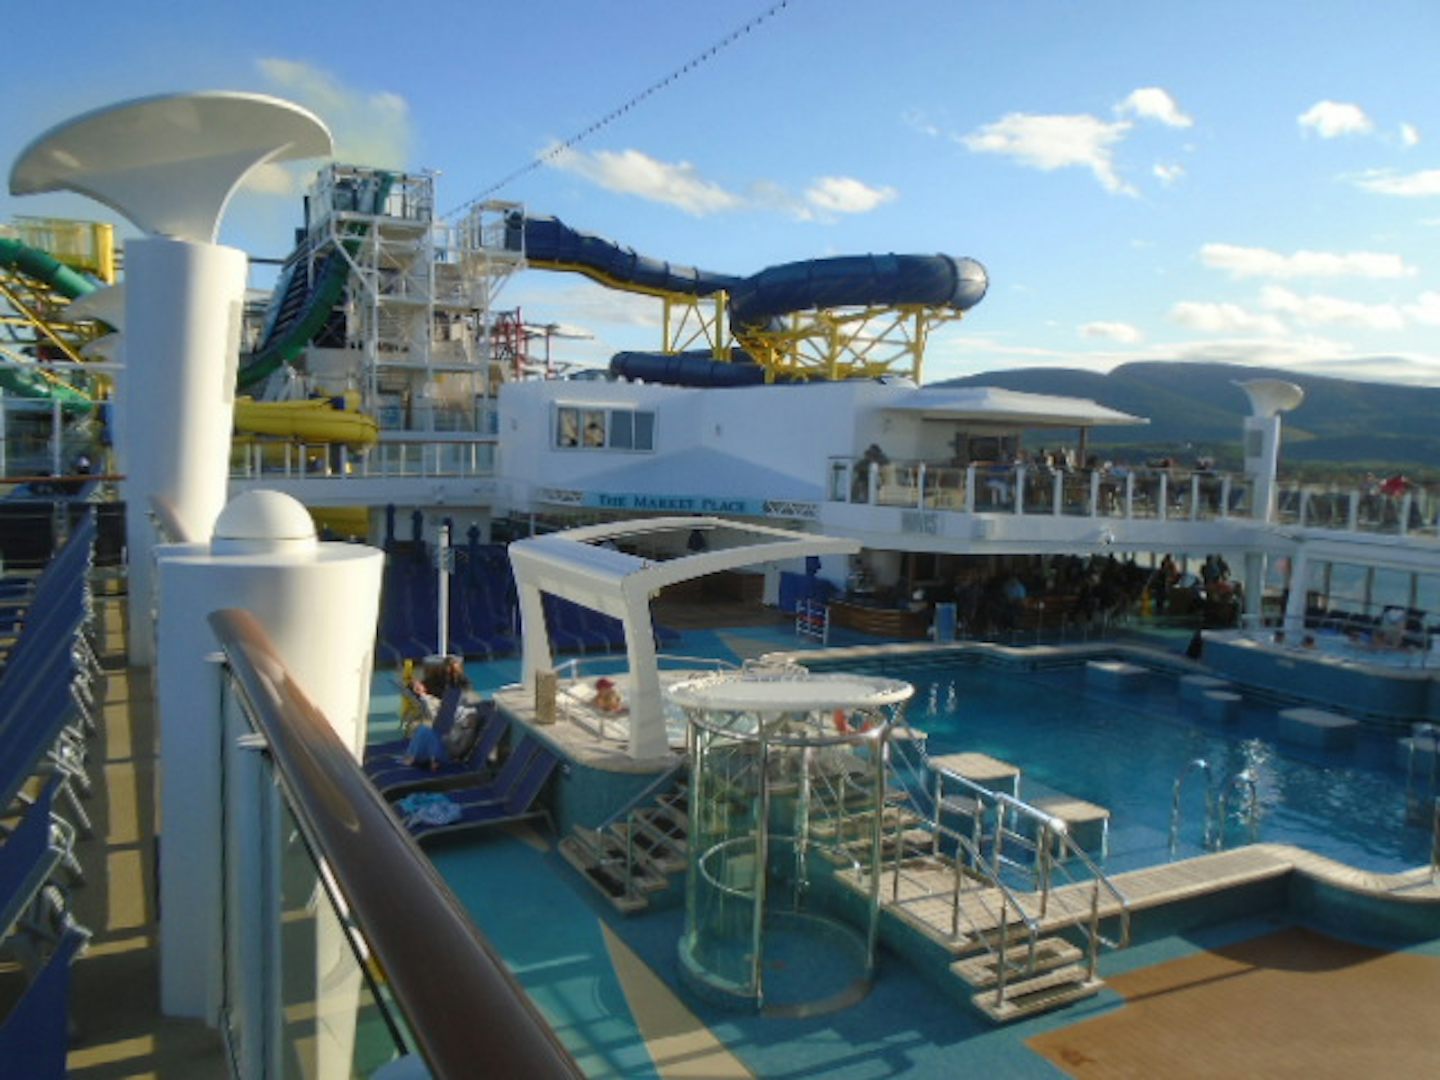 Pool deck - typical use this cruise 